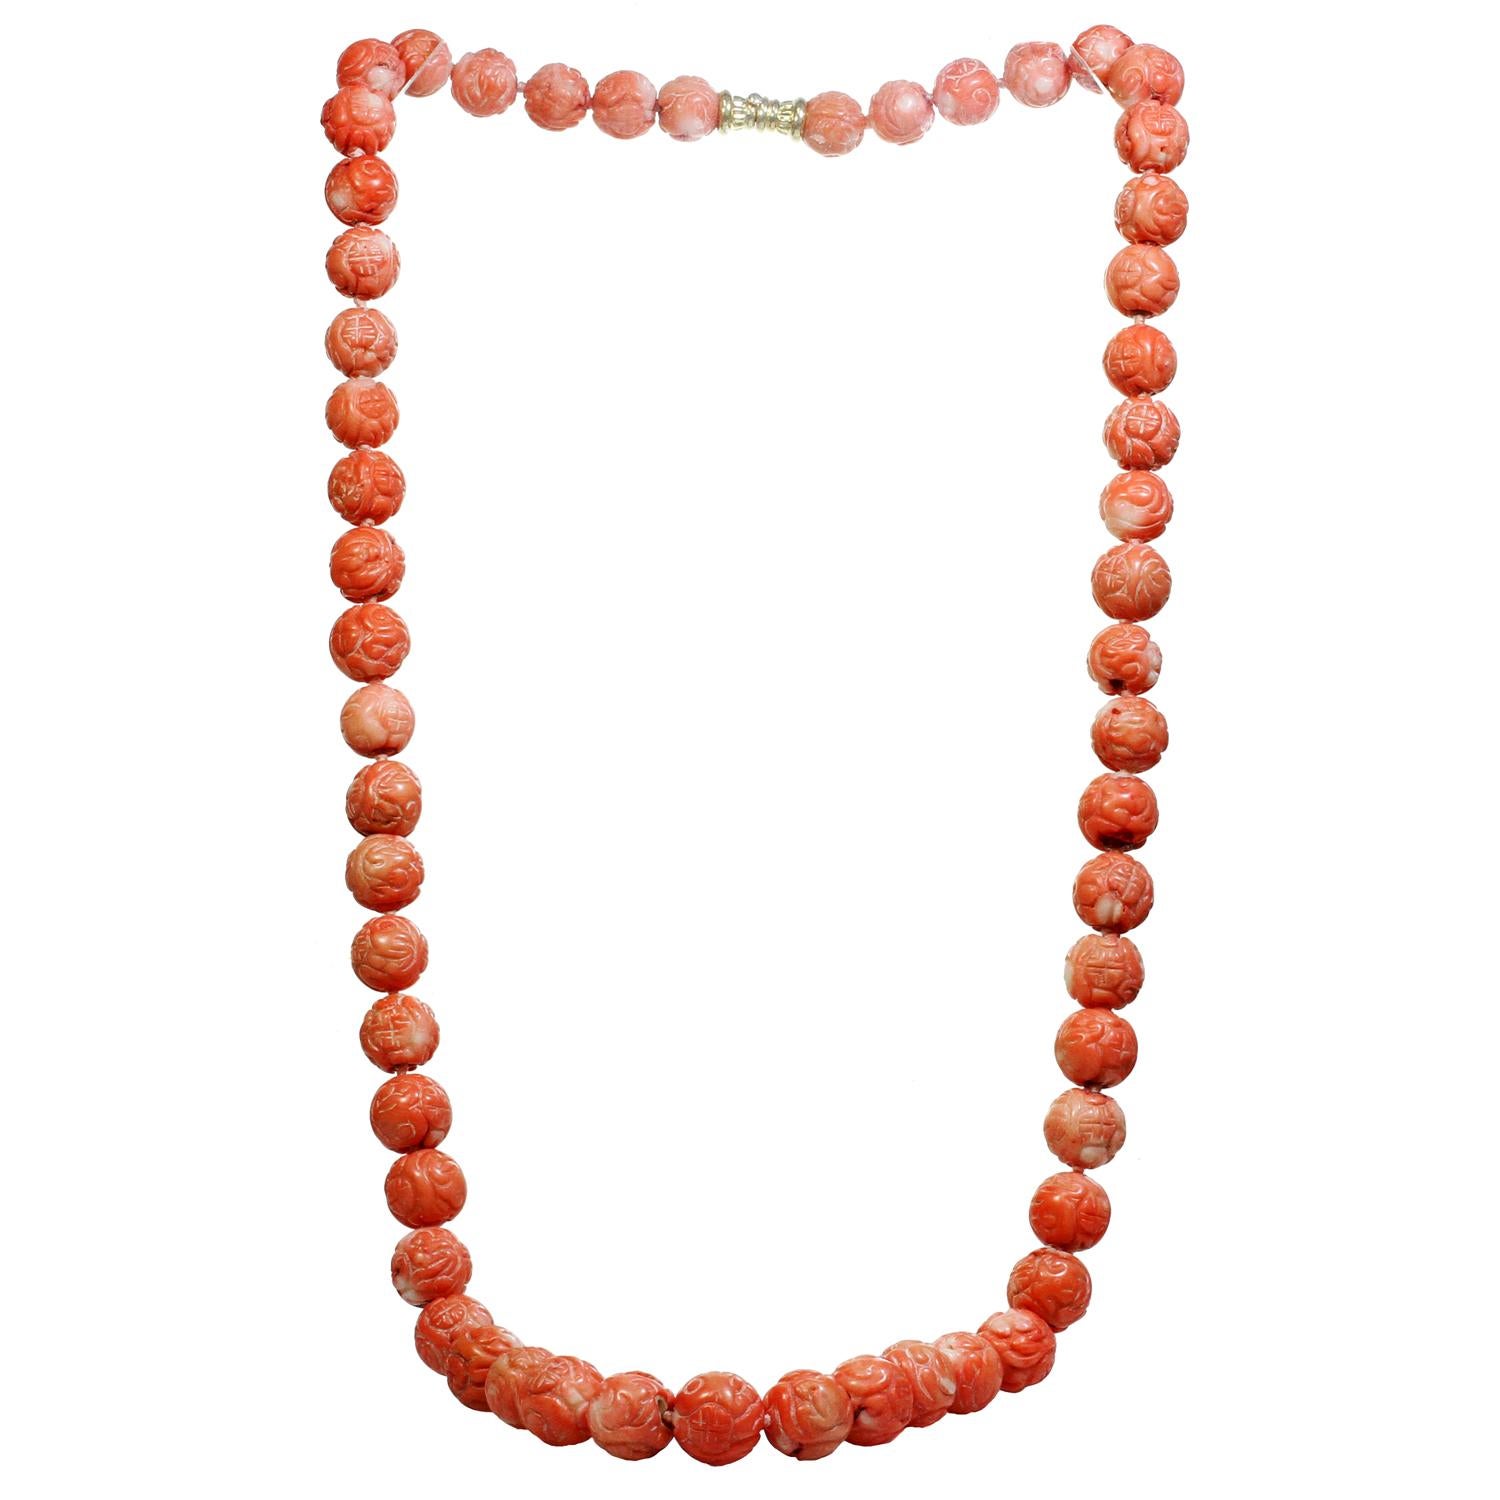 This long gorgeous vintage necklace features 55 carved rose-orange coral beads measuring between 14.0mm -17.0mm in diameter and compeleted with 14k yellow gold clasp. Made in United States circa 1970s. Measurements: 36